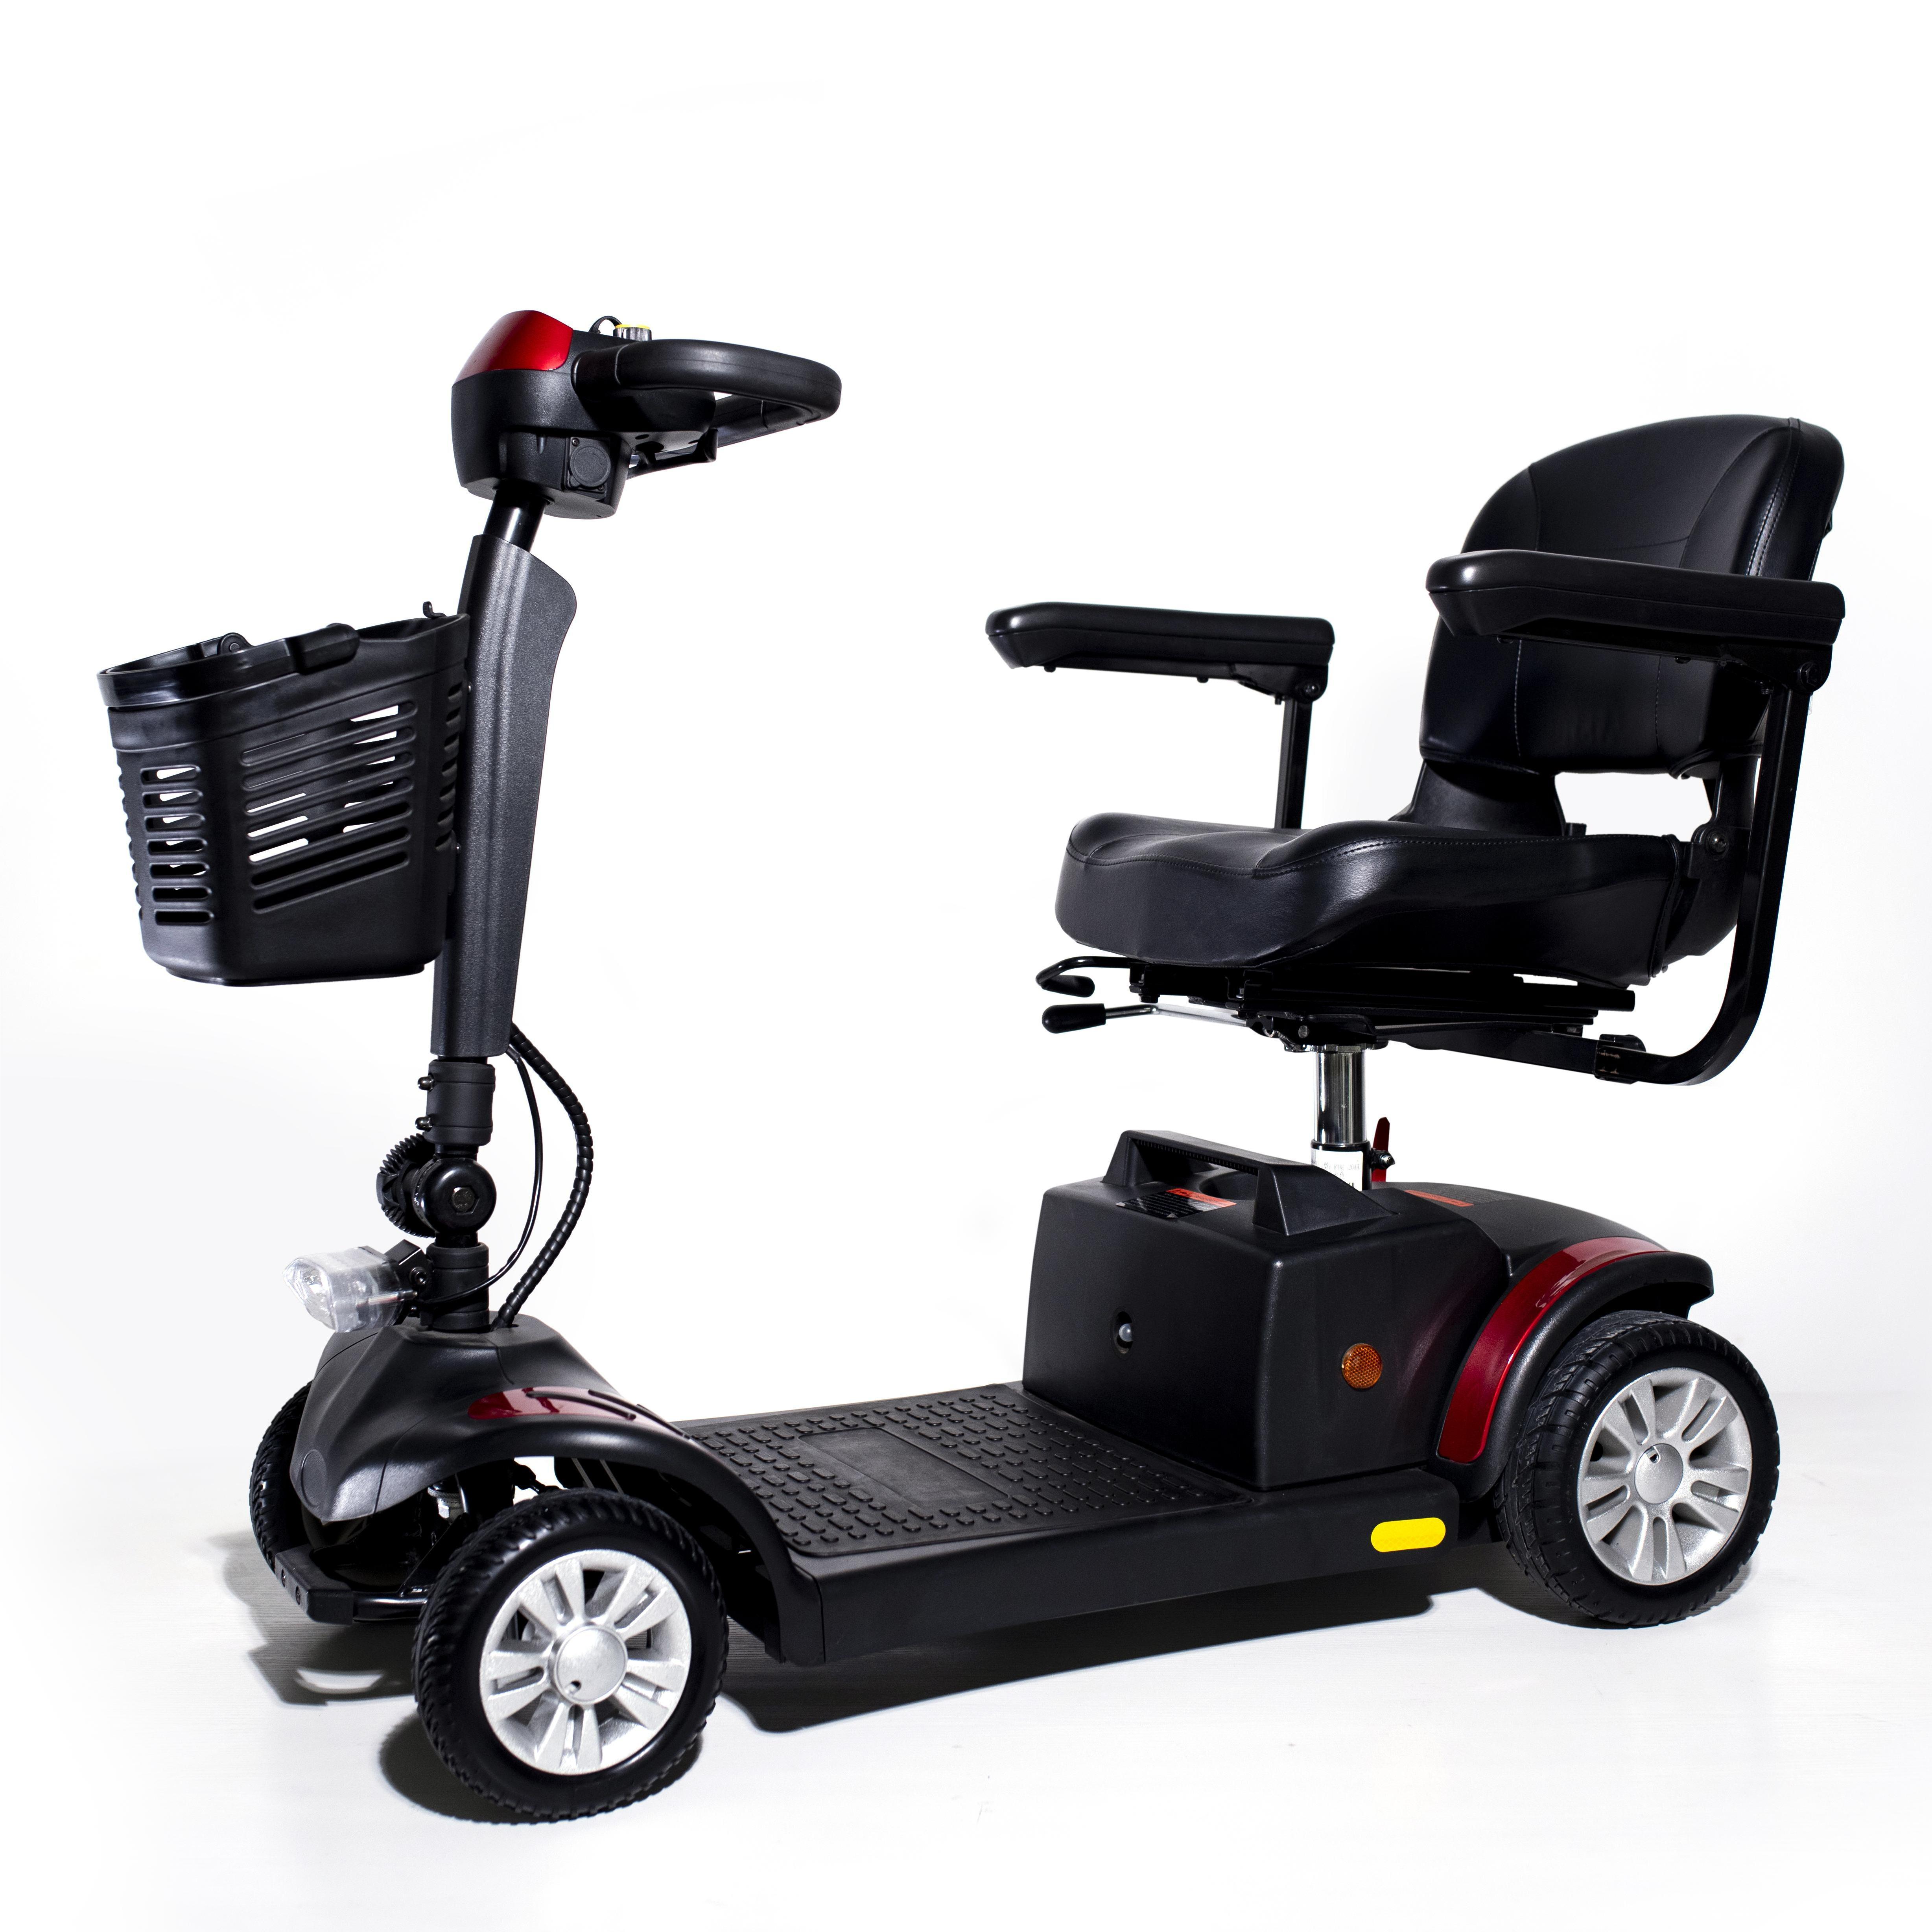 Jiangte 4 wheels detachable CE mobility scooter R103-20AH for elderly Featured Image